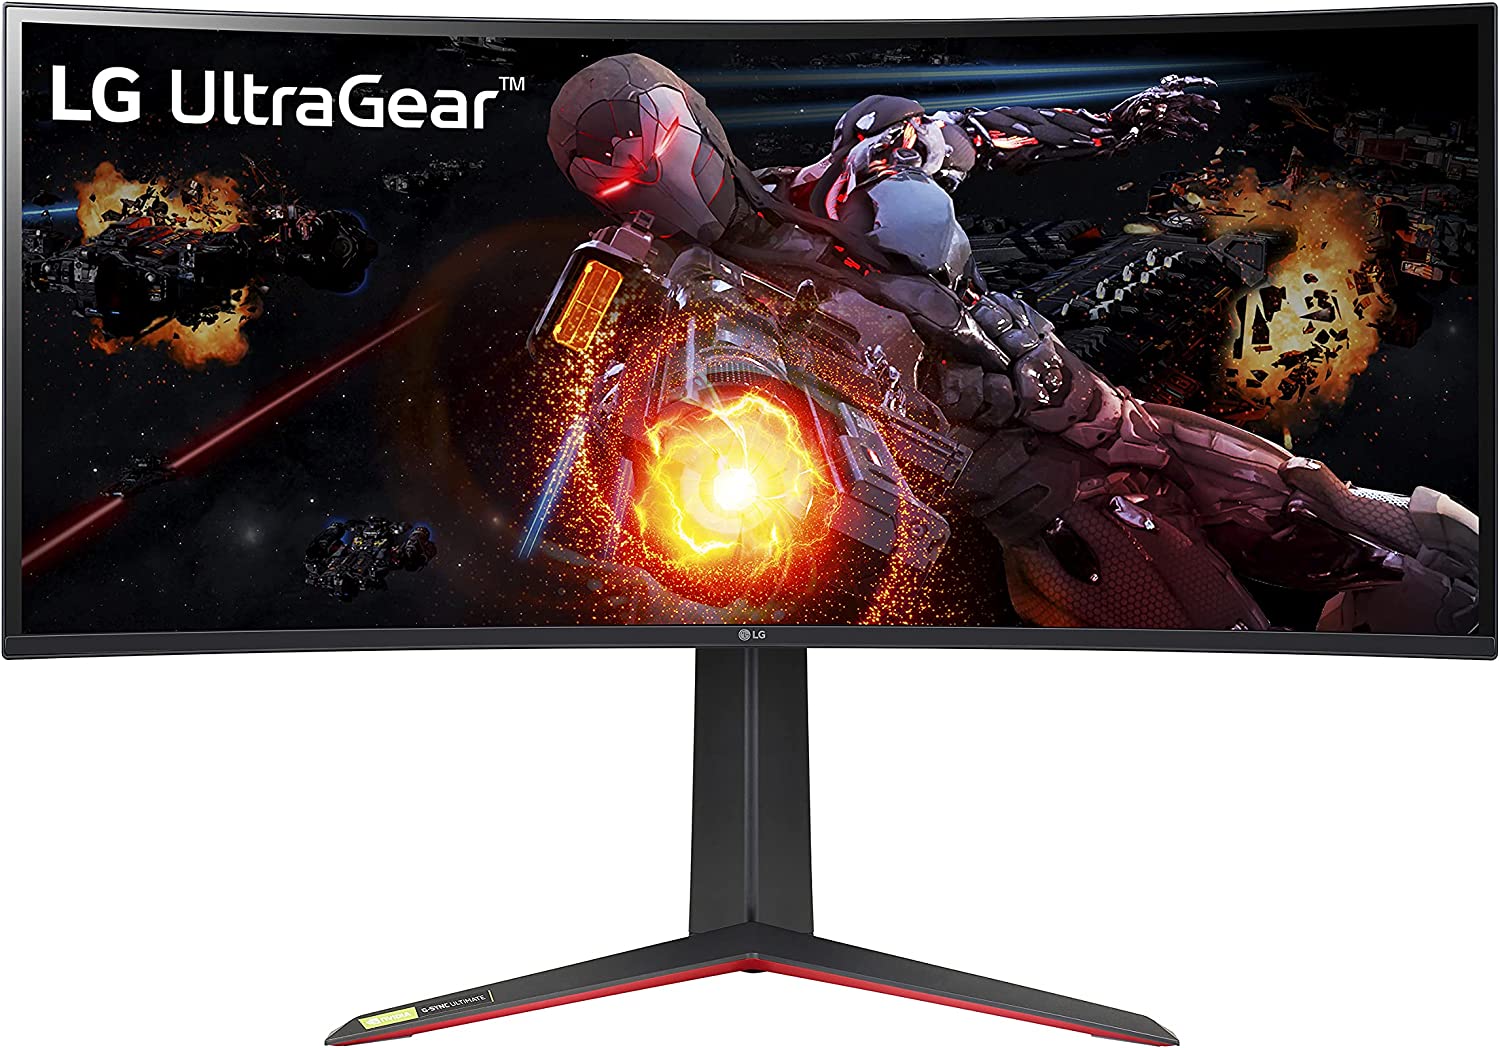 LG 34GP950G-B 34 Inch Ultragear QHD (3440 x 1440) Nano IPS Curved Gaming Monitor with 1ms Response Time and 144HZ Refresh Rate and NVIDIA G-SYNC Ultimate